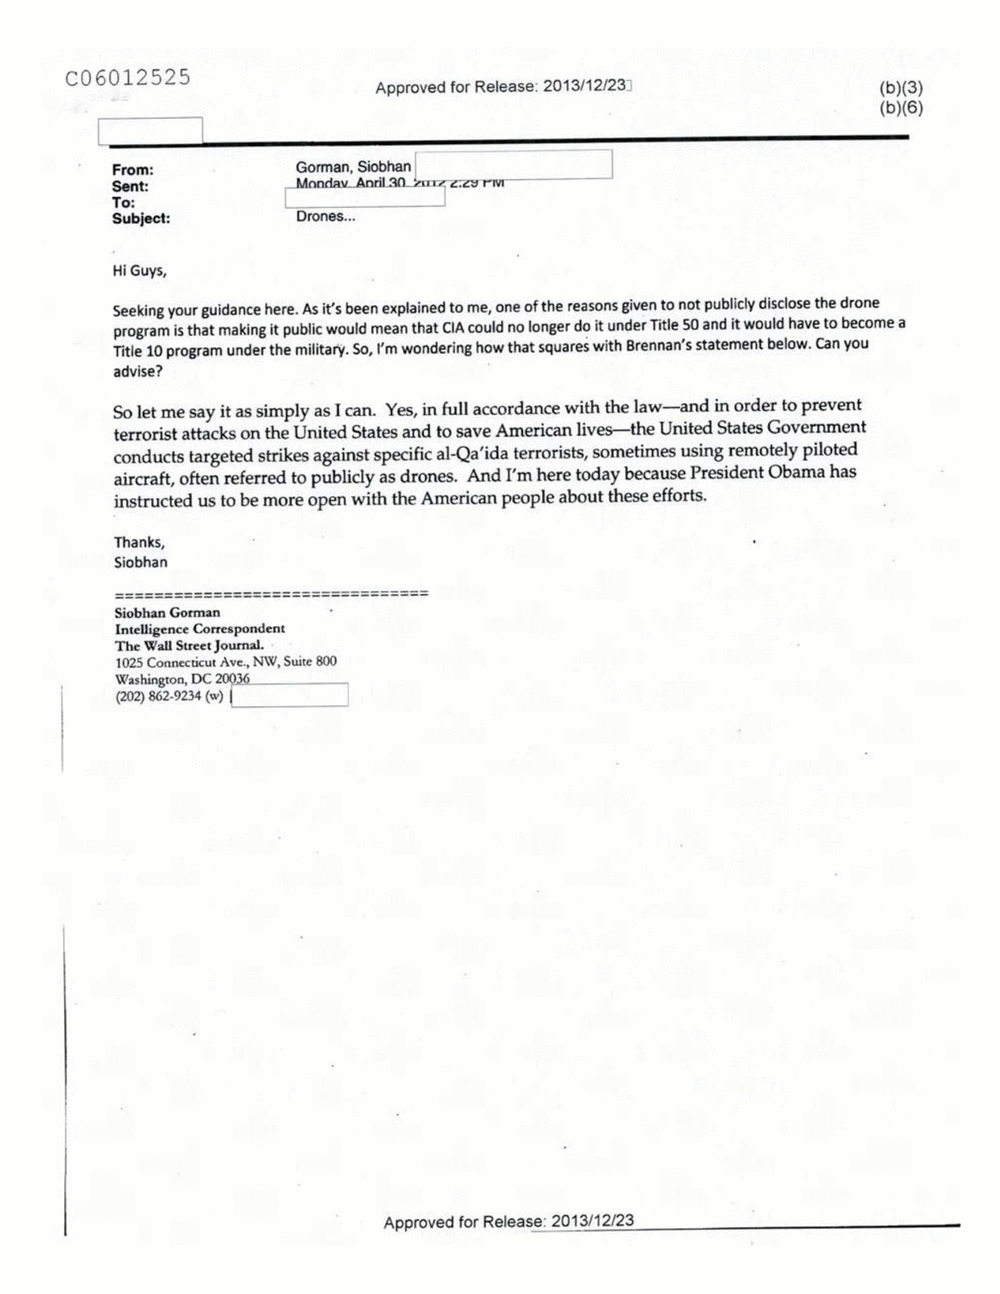 Page 49 from Email Correspondence Between Reporters and CIA Flacks